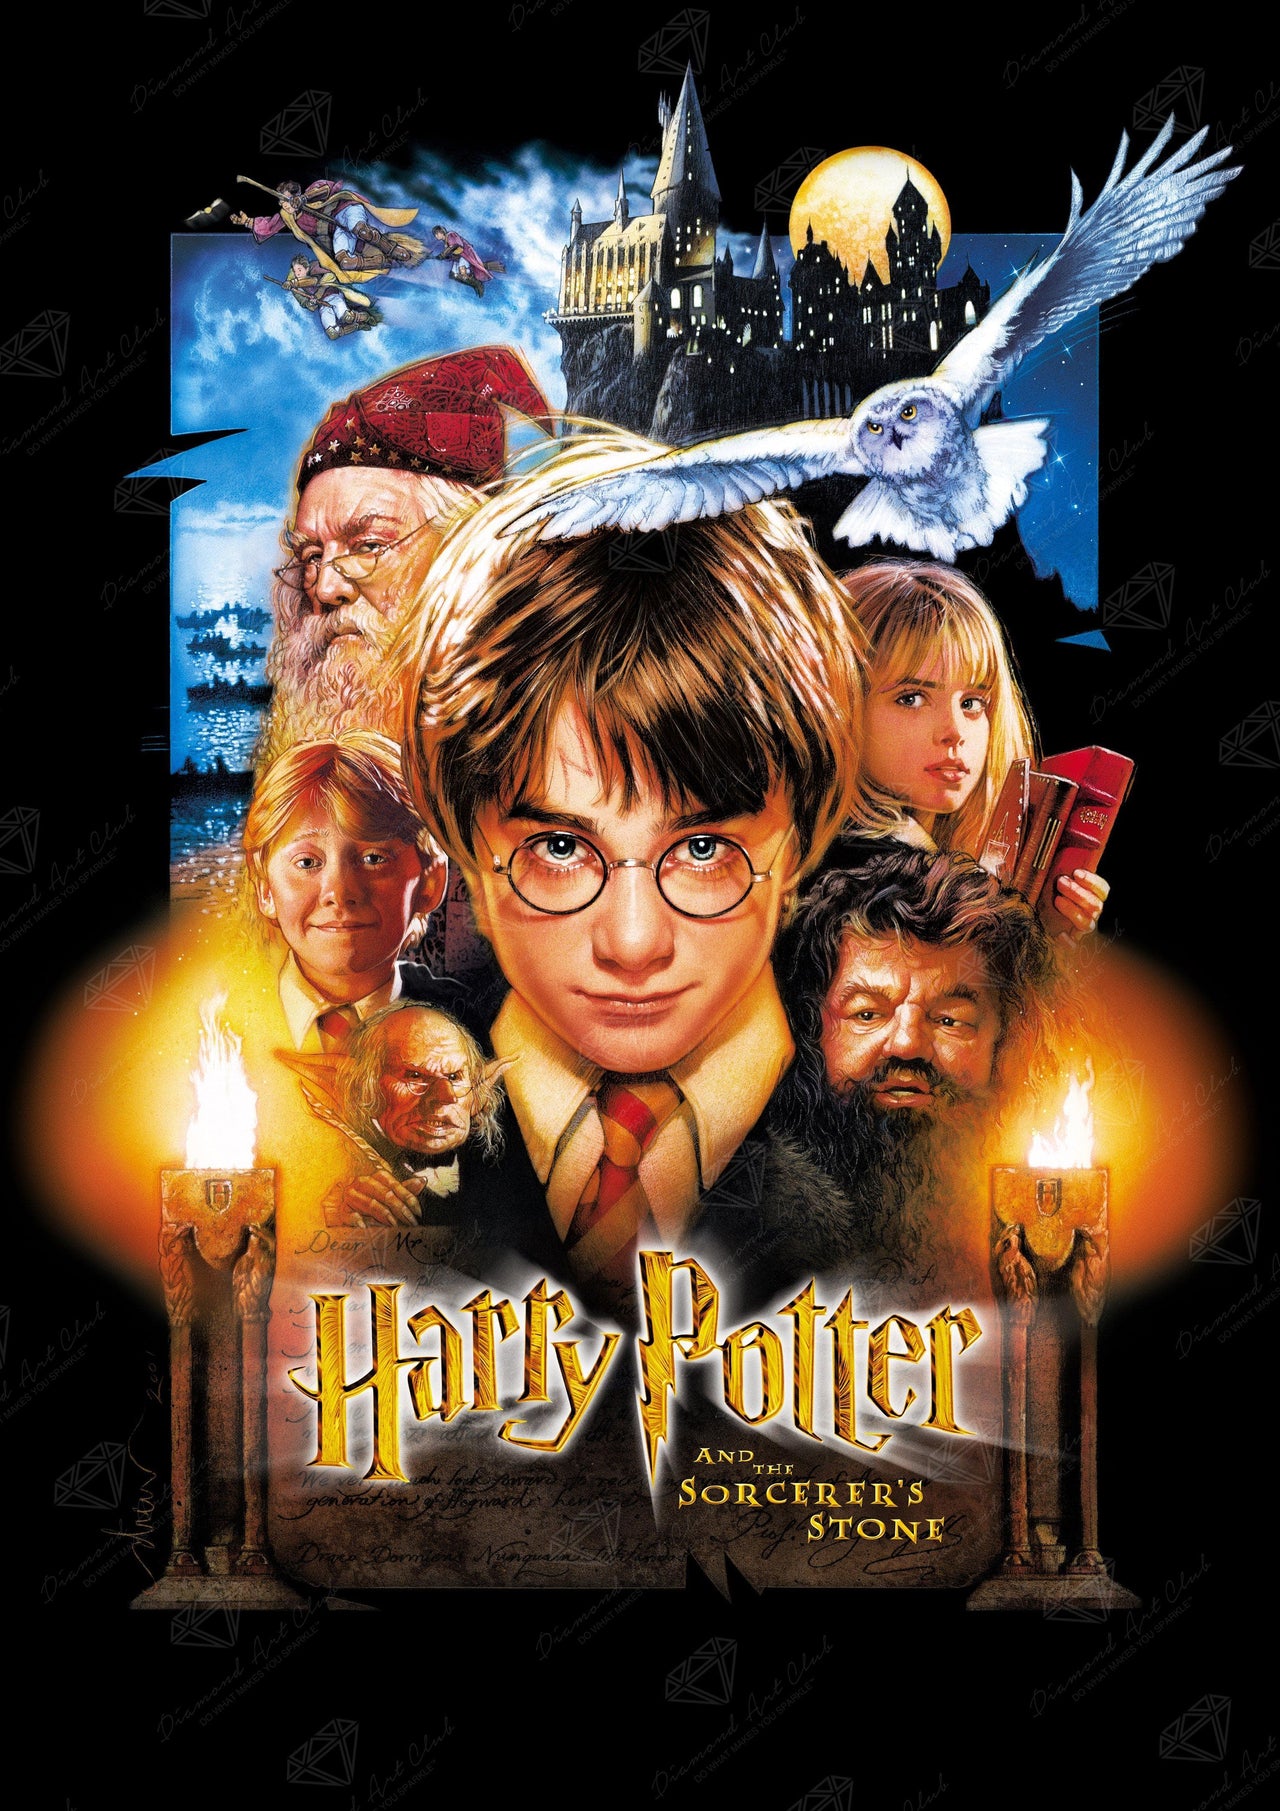 Diamond Painting Harry Potter™ and The Sorcerer's Stone 27.6" x 39.0″ (70cm x 99cm) / Square With 51 Colors Including 4 ABs / 108,584